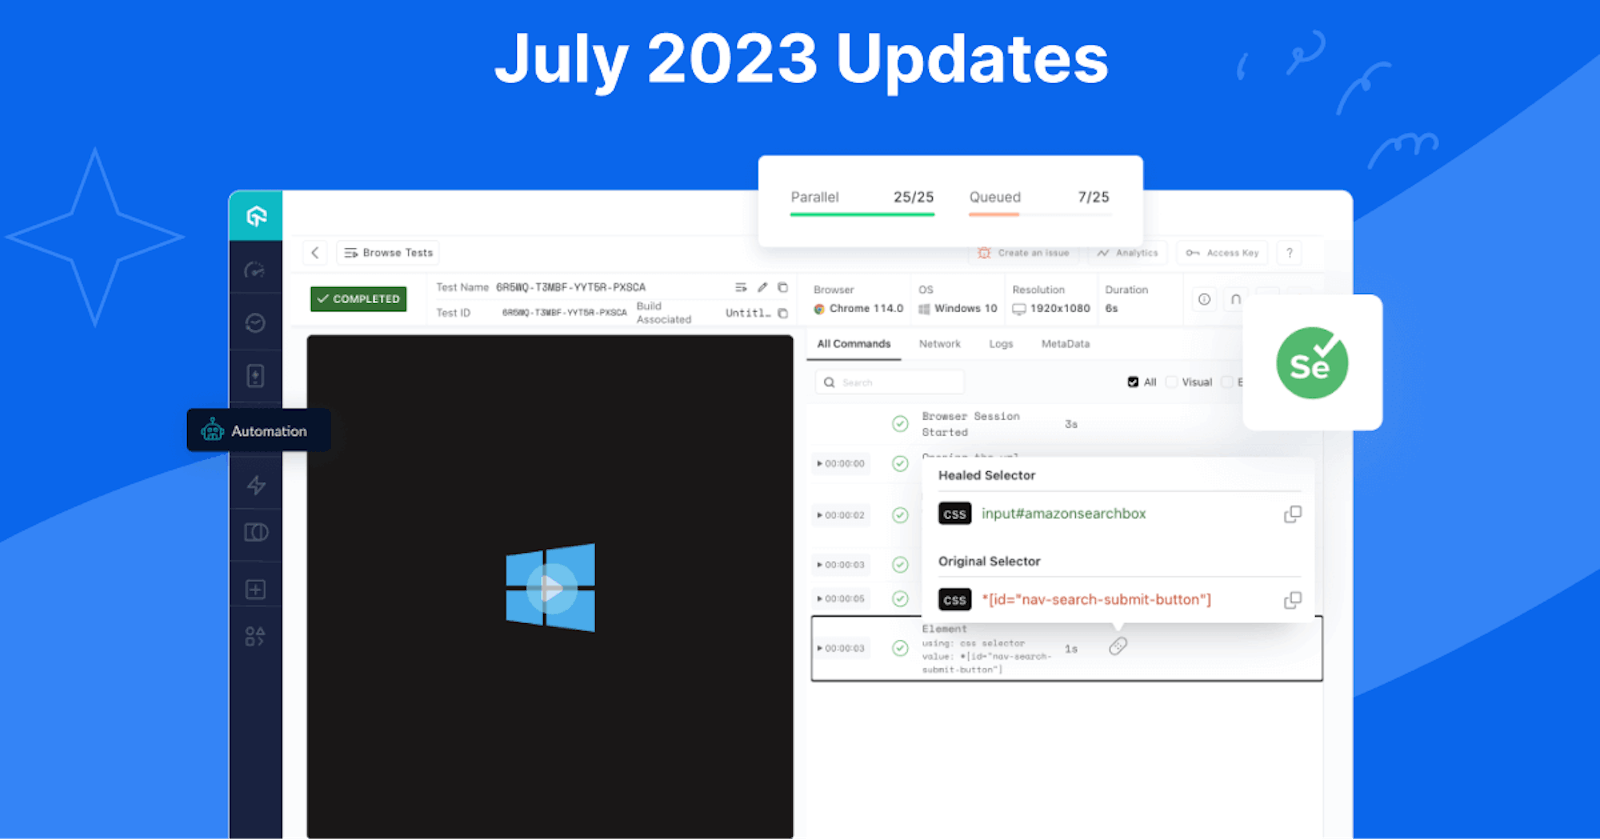 July’23 Updates: Introducing Auto-Healing for Test Flakiness, Live With macOS Sonoma, Android 14 (Beta), and More